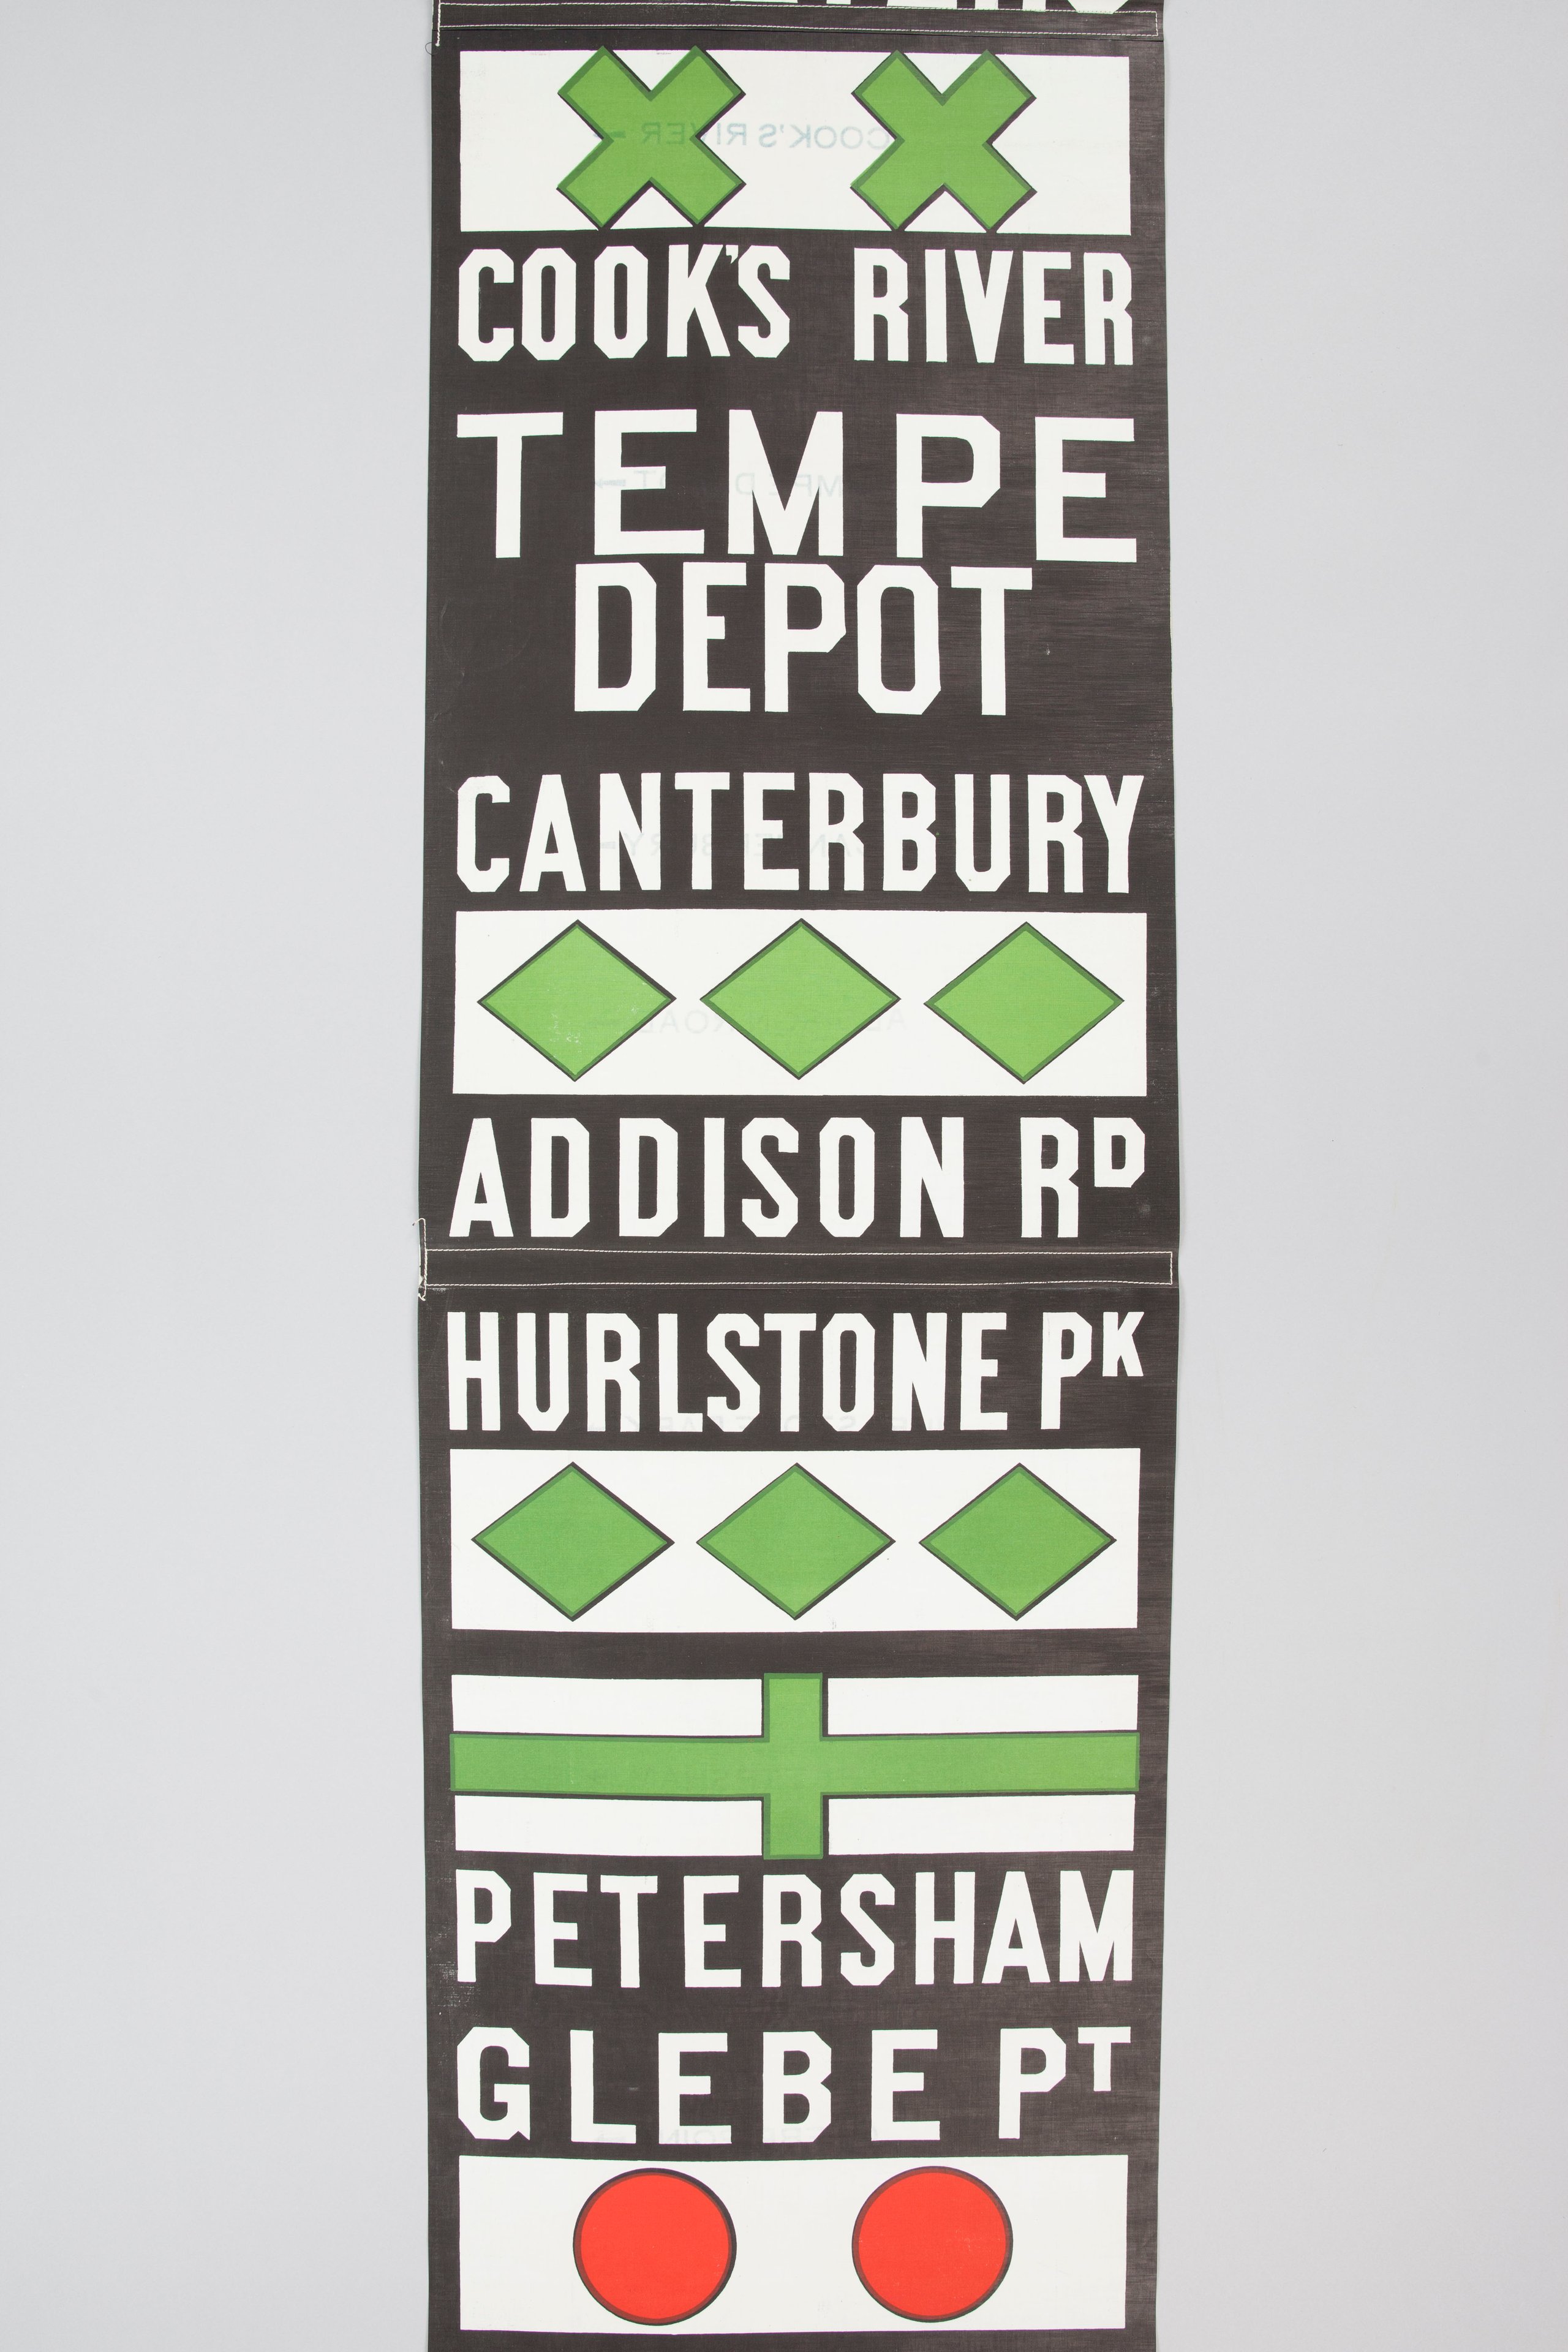 Destination rolls used on Sydney and Newcastle electric trams